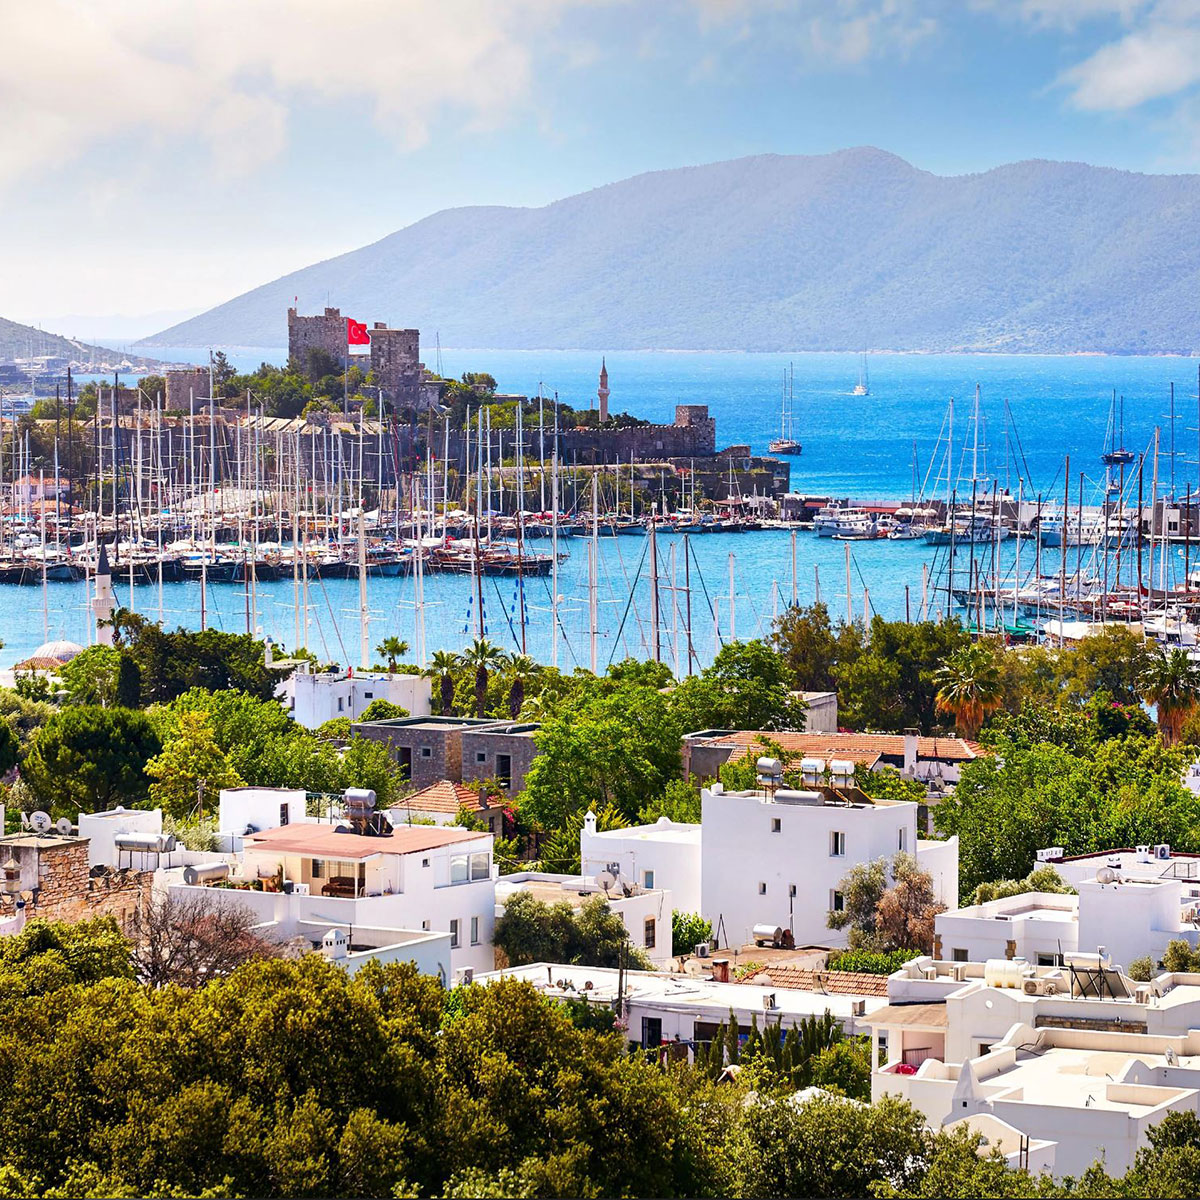 How to Have a Sustainable Holiday in Bodrum?